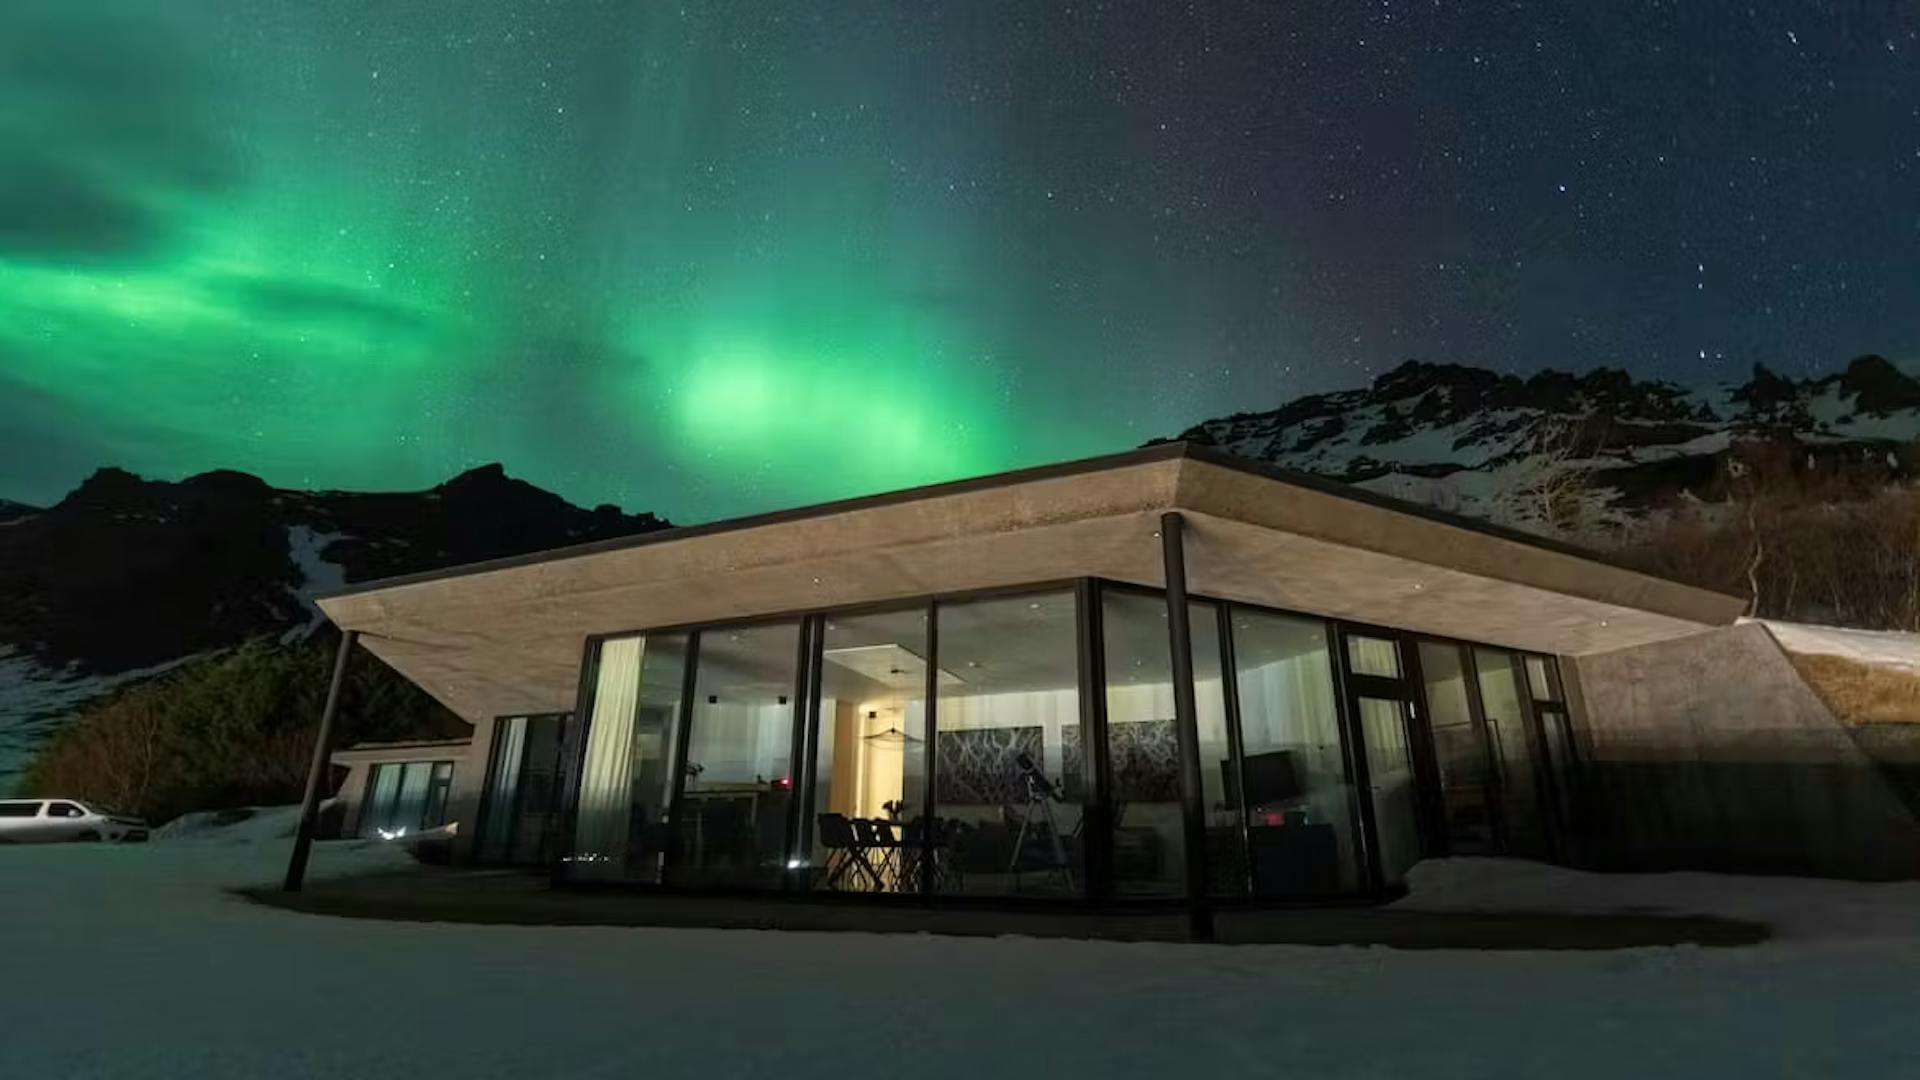 Villa with Northern Lights above the house